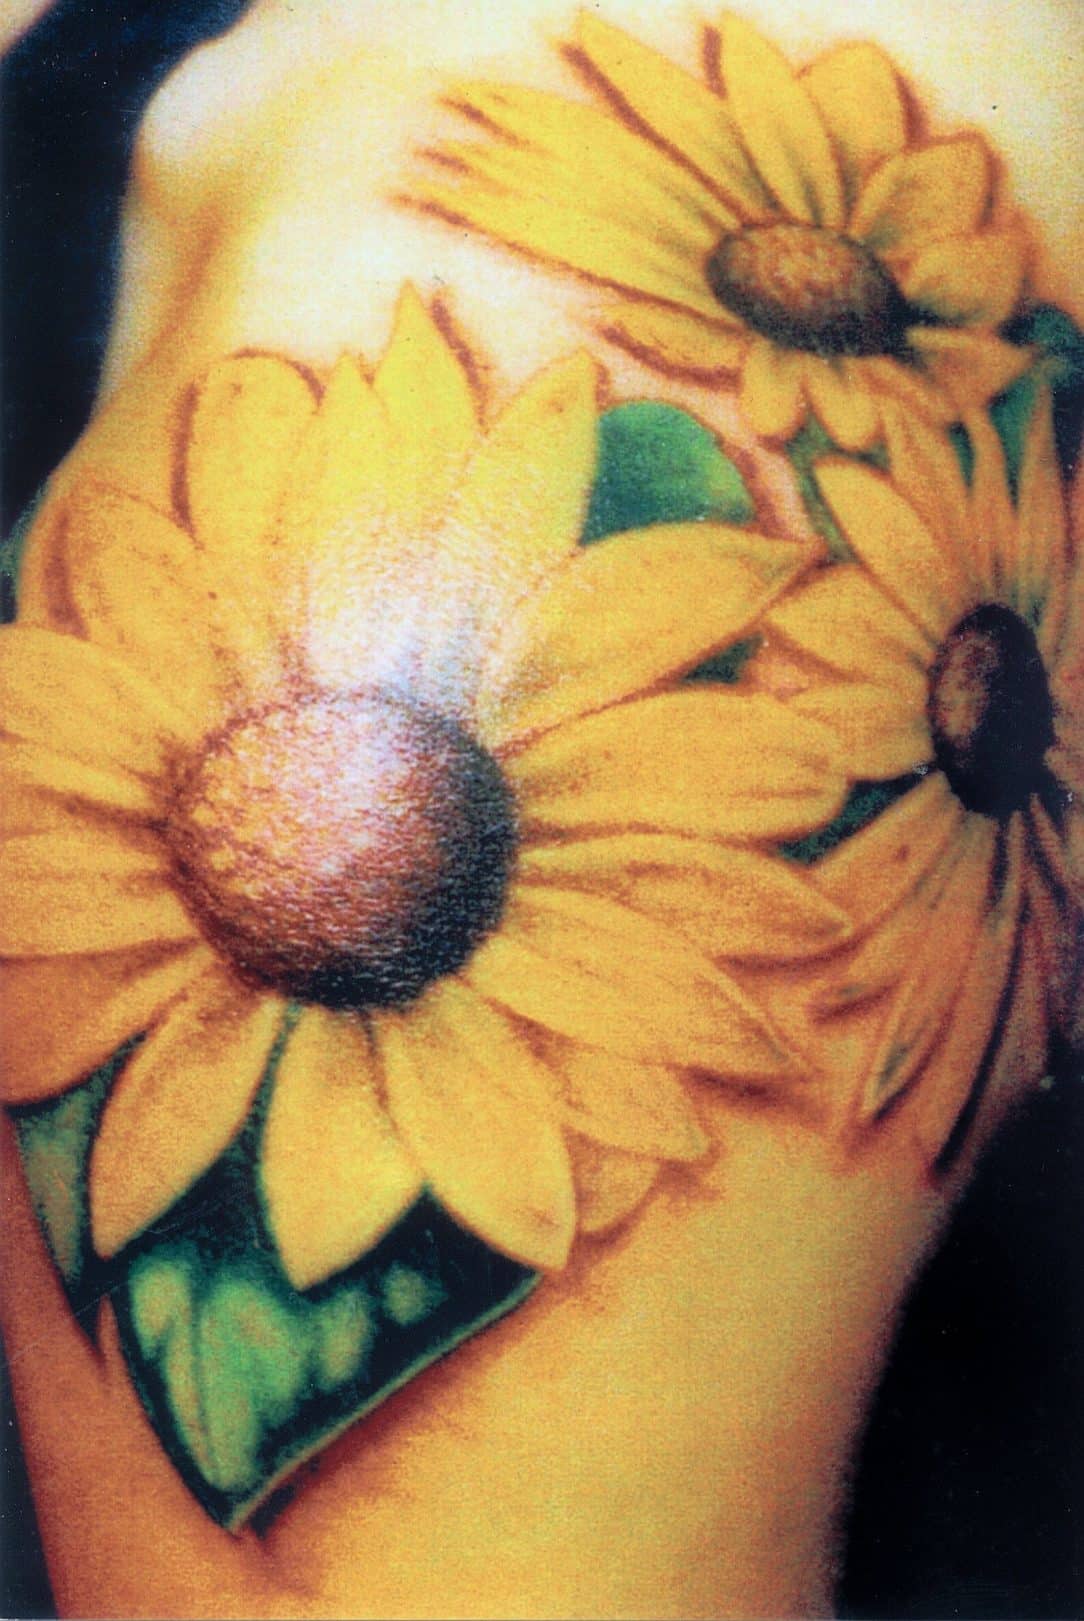 Sunflower Tattoos for Men - Ideas and Inspiration for Guys